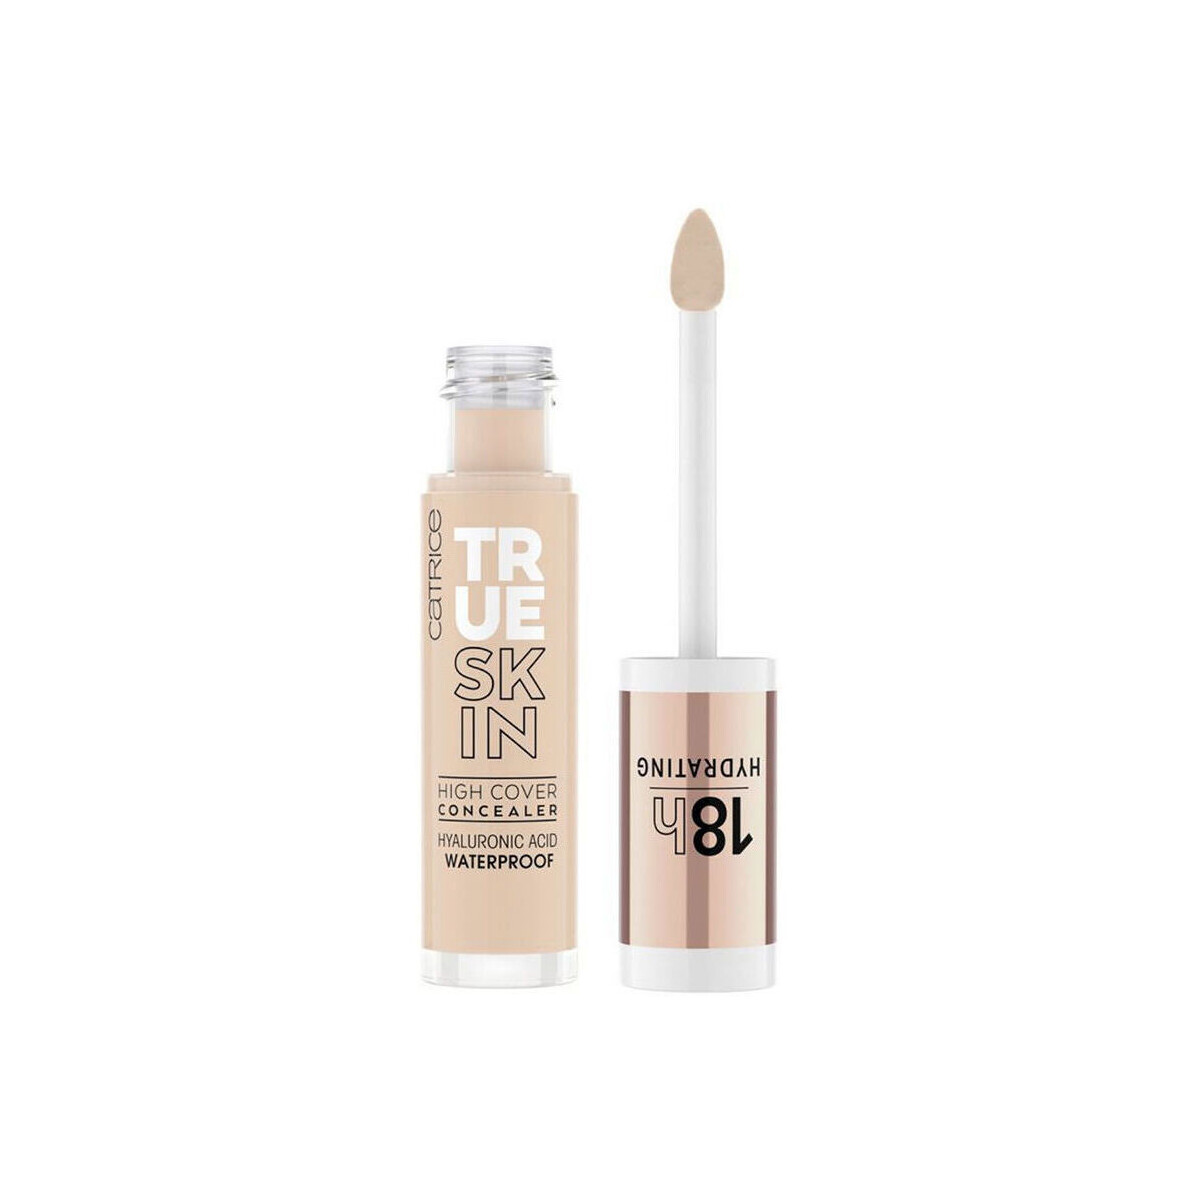 Beauty Damen Make-up & Foundation  Catrice True Skin High Cover Concealer 010-cool Cashmere 